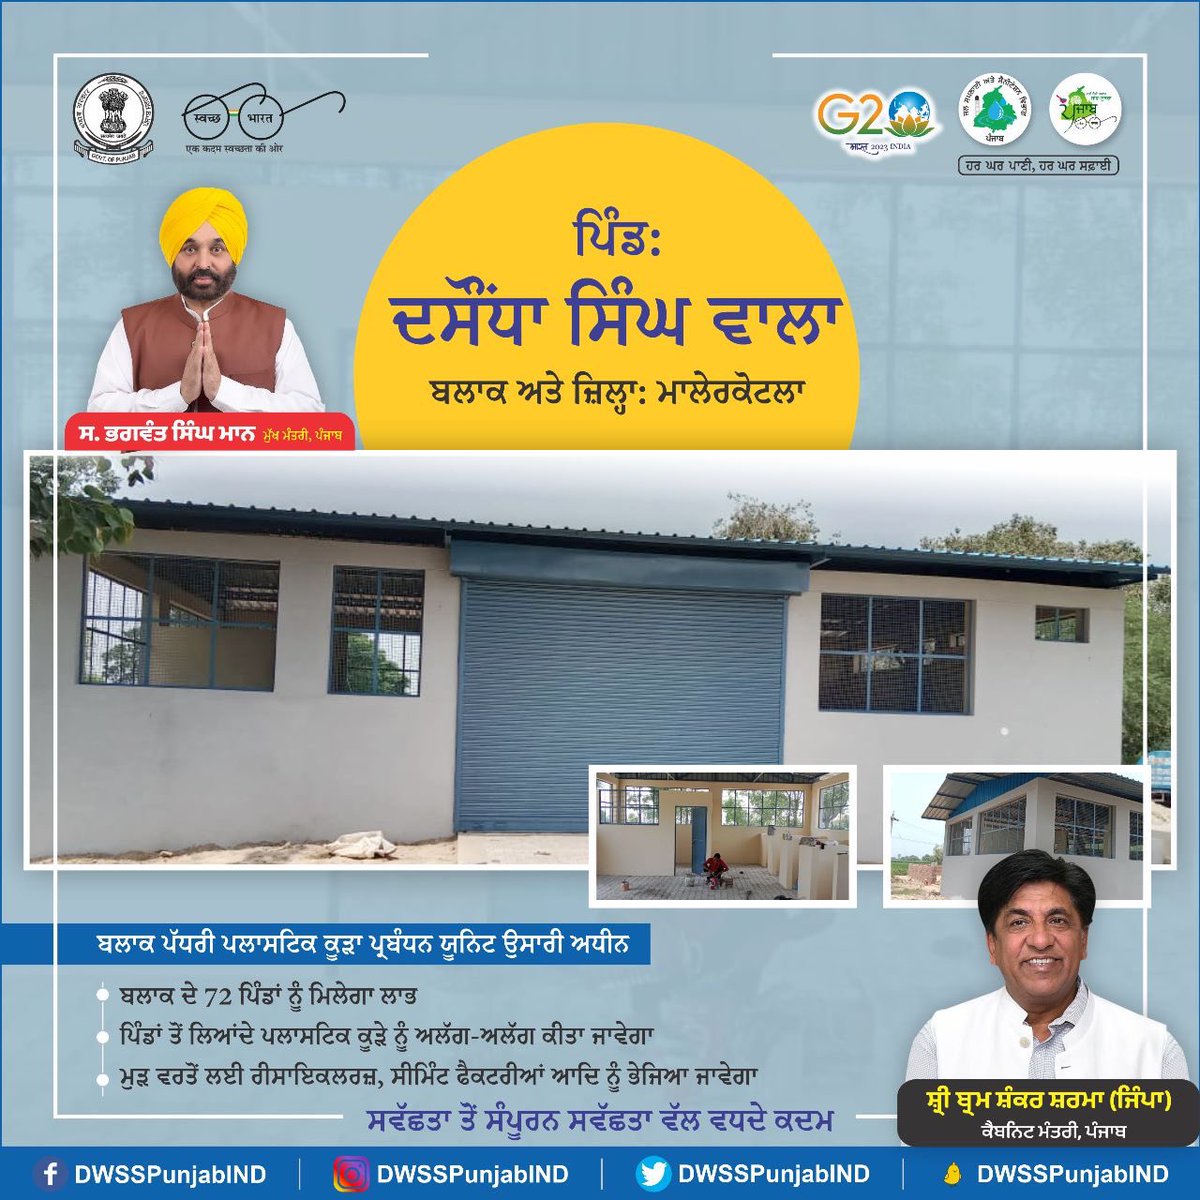 Under Swachh Bharat Mission (Grameen) a block level Plastic Waste Management Unit is being constructed in village Dasaunda Singh Wala of district Malerkotla. The plastic waste collected from 72 villages of the block shall be managed in this unit. #plasticwastemanagement